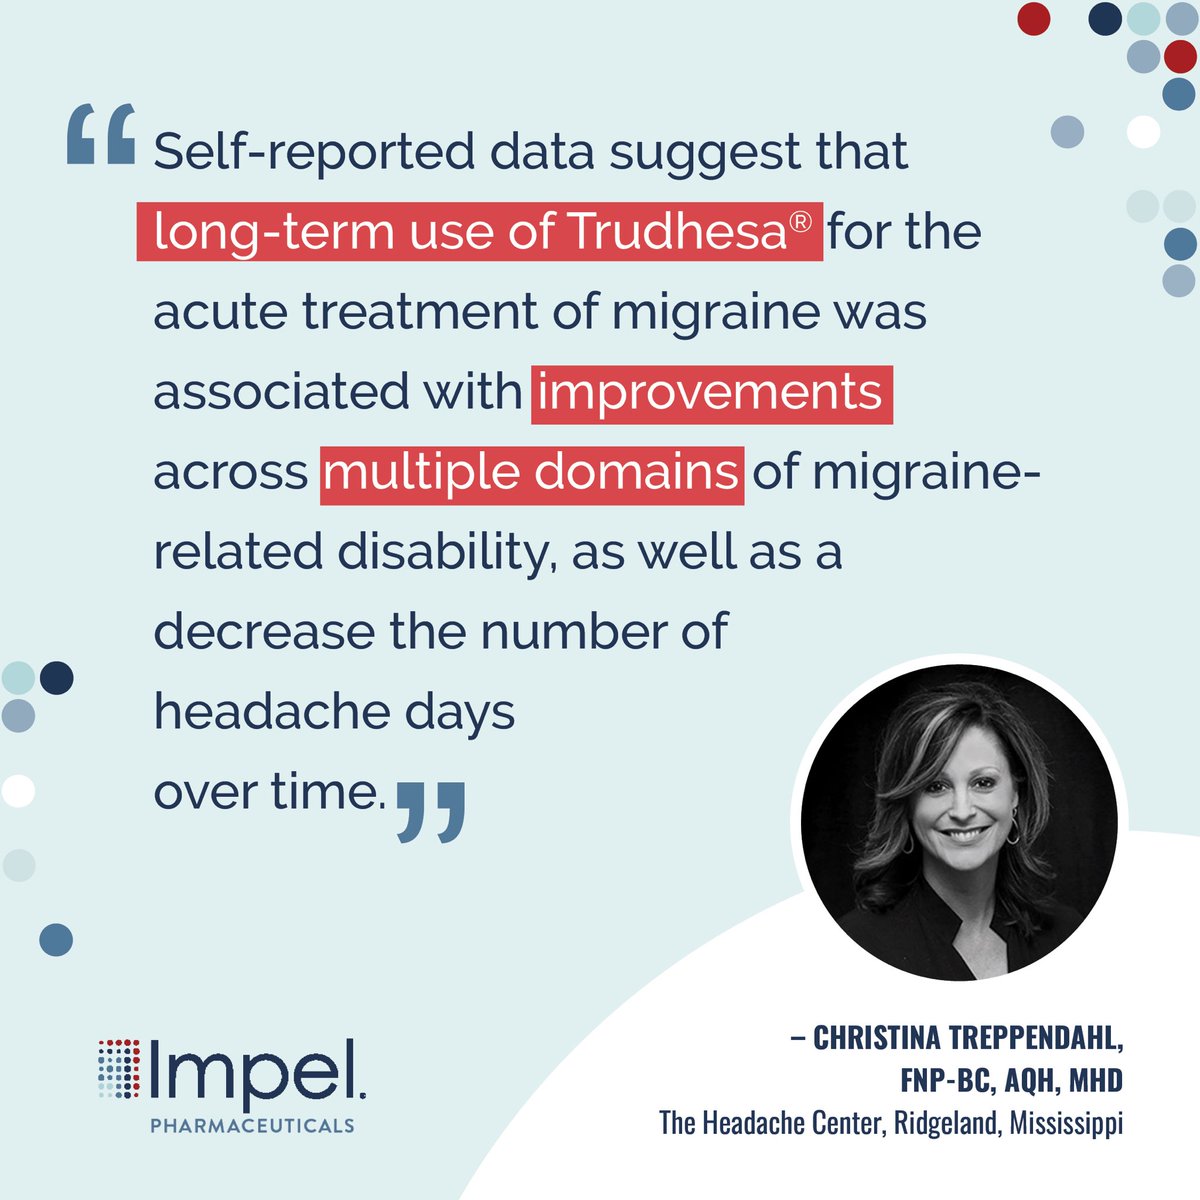 Additional self-reported data suggest that the acute treatment of #migraine with Trudhesa® can reduce the burden of migraine-associated disability for patients as well as decrease the number of headache days over time. (poster P-176)
#AHSAM22 #NeuroTwitter